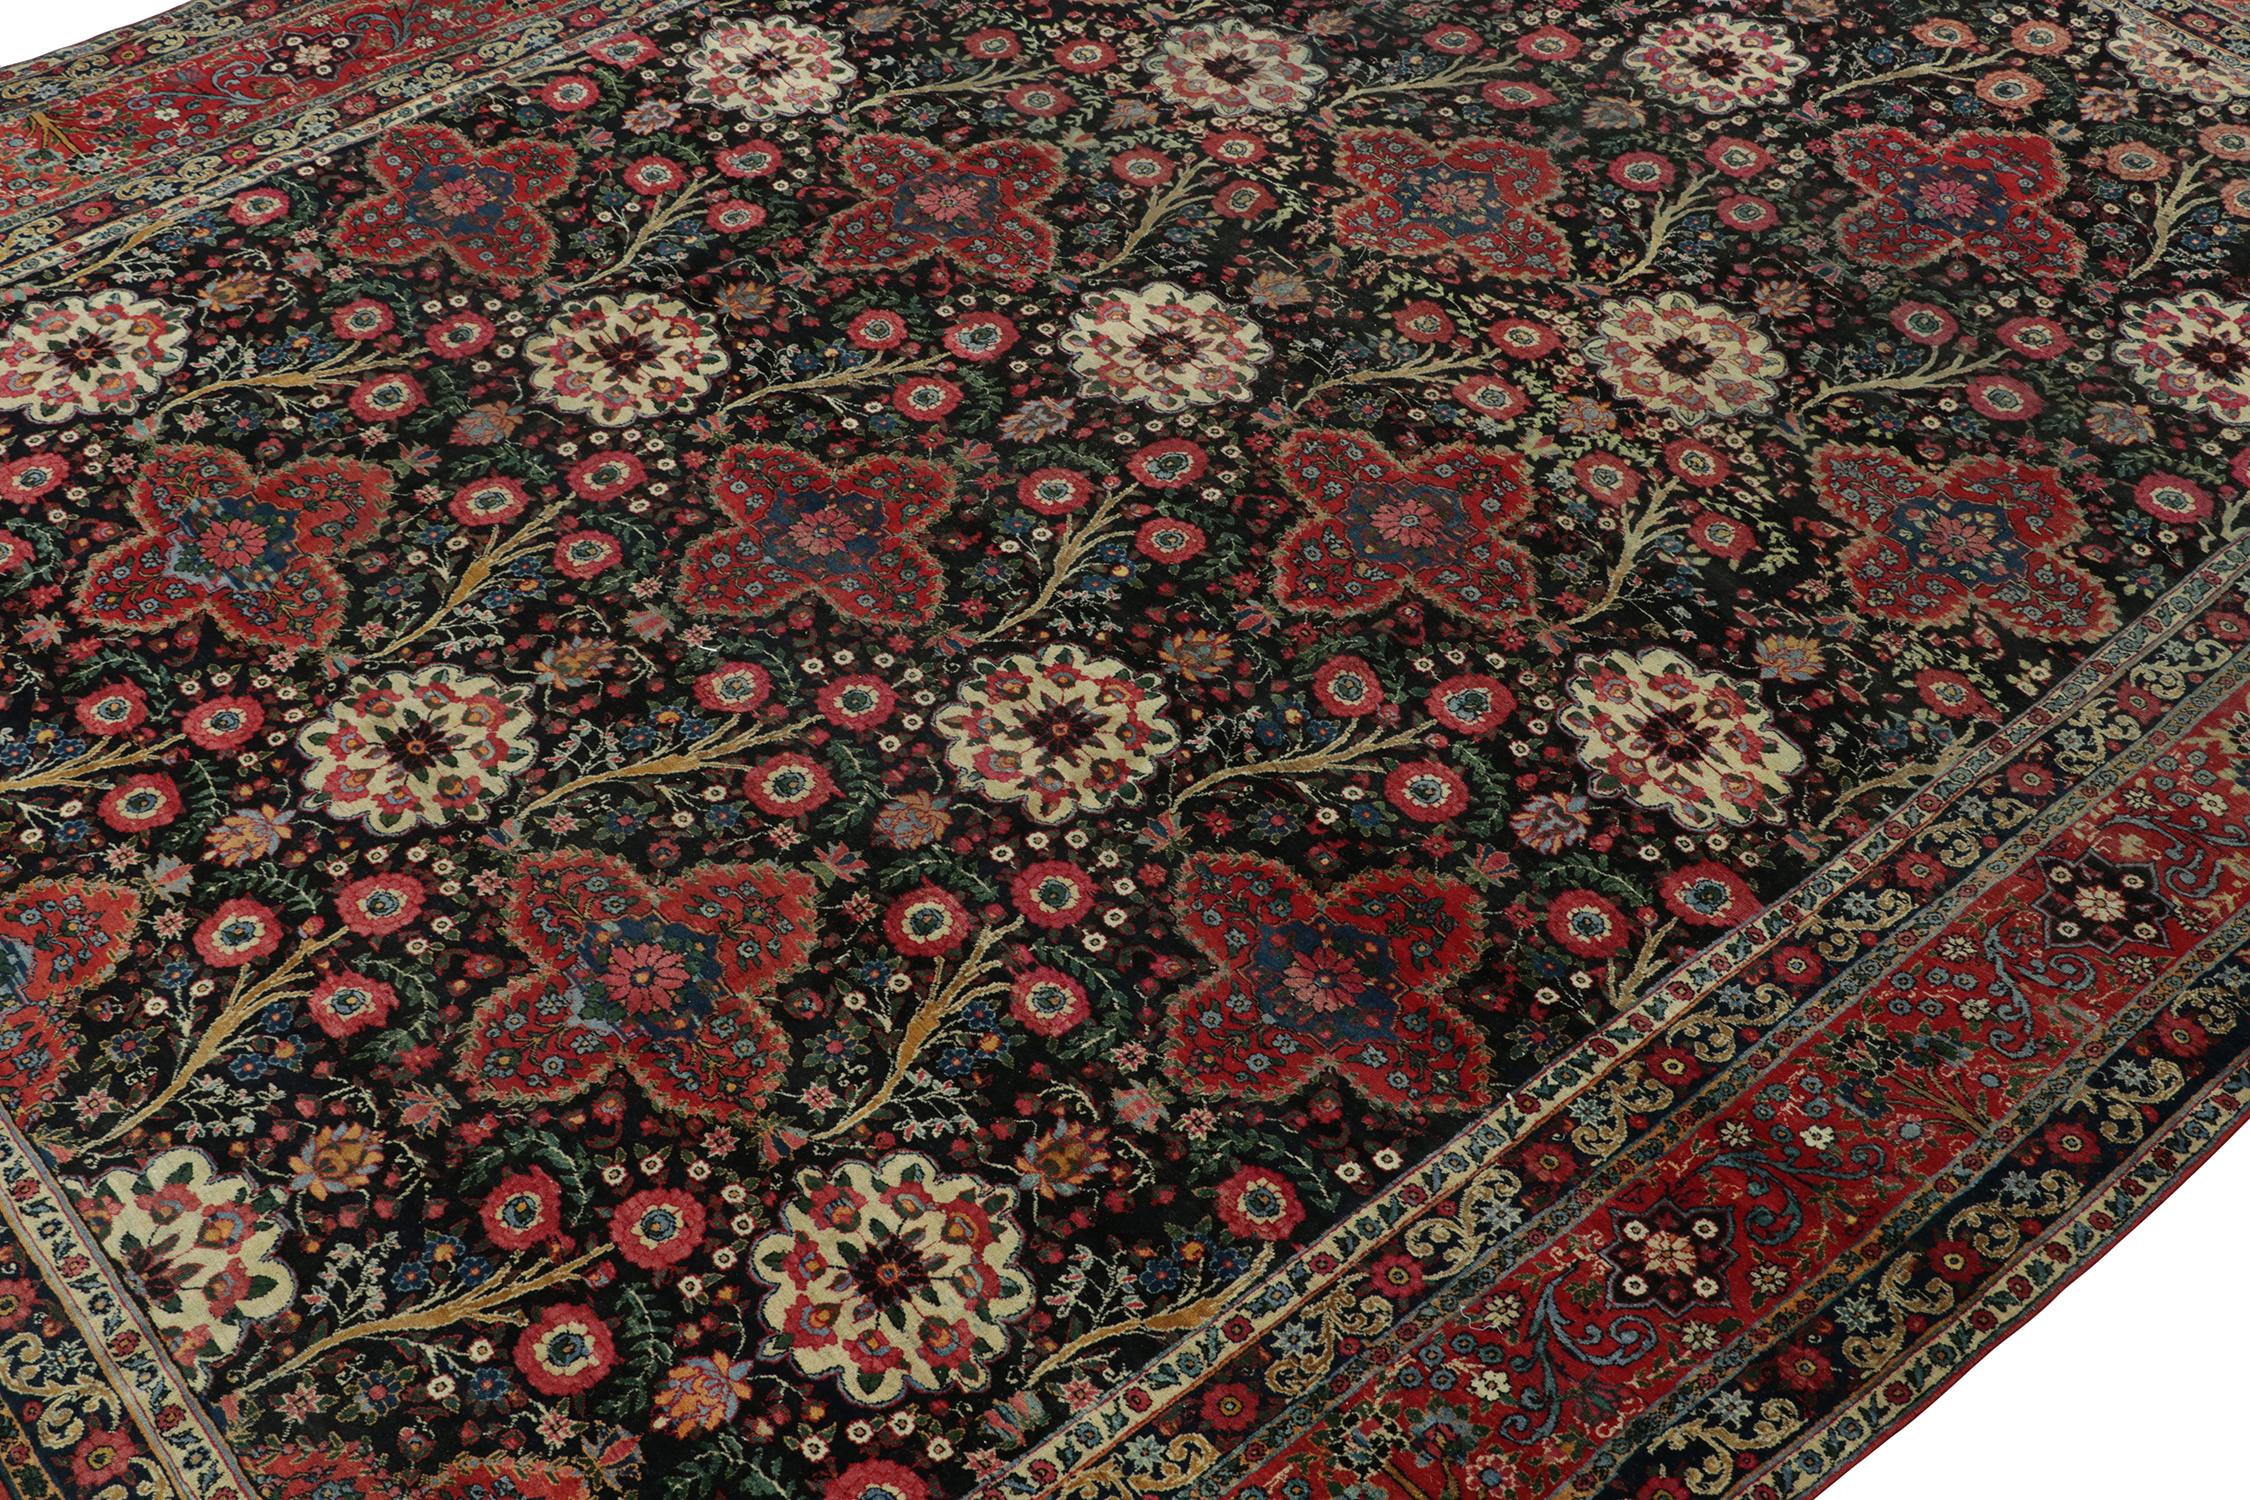 Hand-Knotted Antique Persian Rug in Black with Red Floral Patterns - by Rug & Kilim For Sale